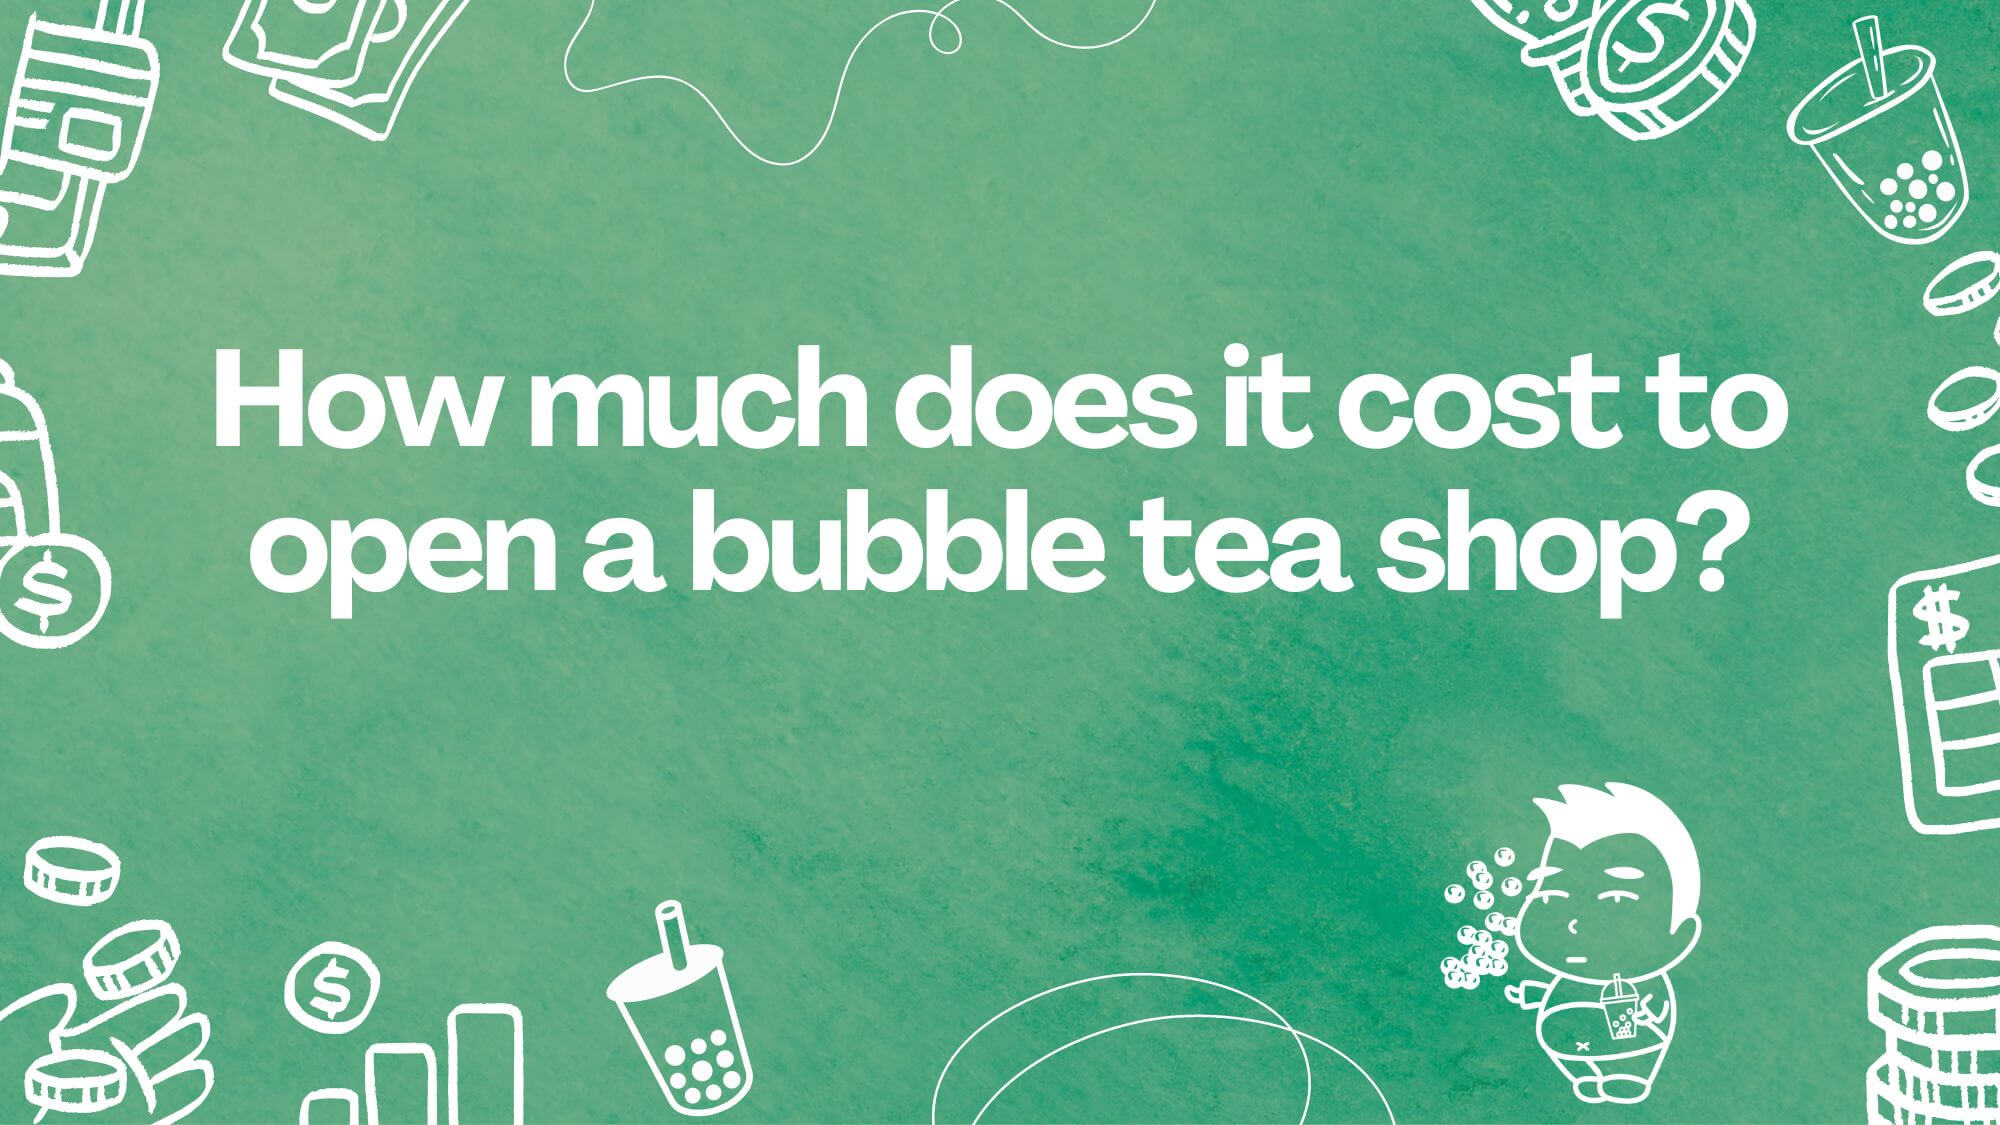 How much does it cost to open a bubble tea shop?